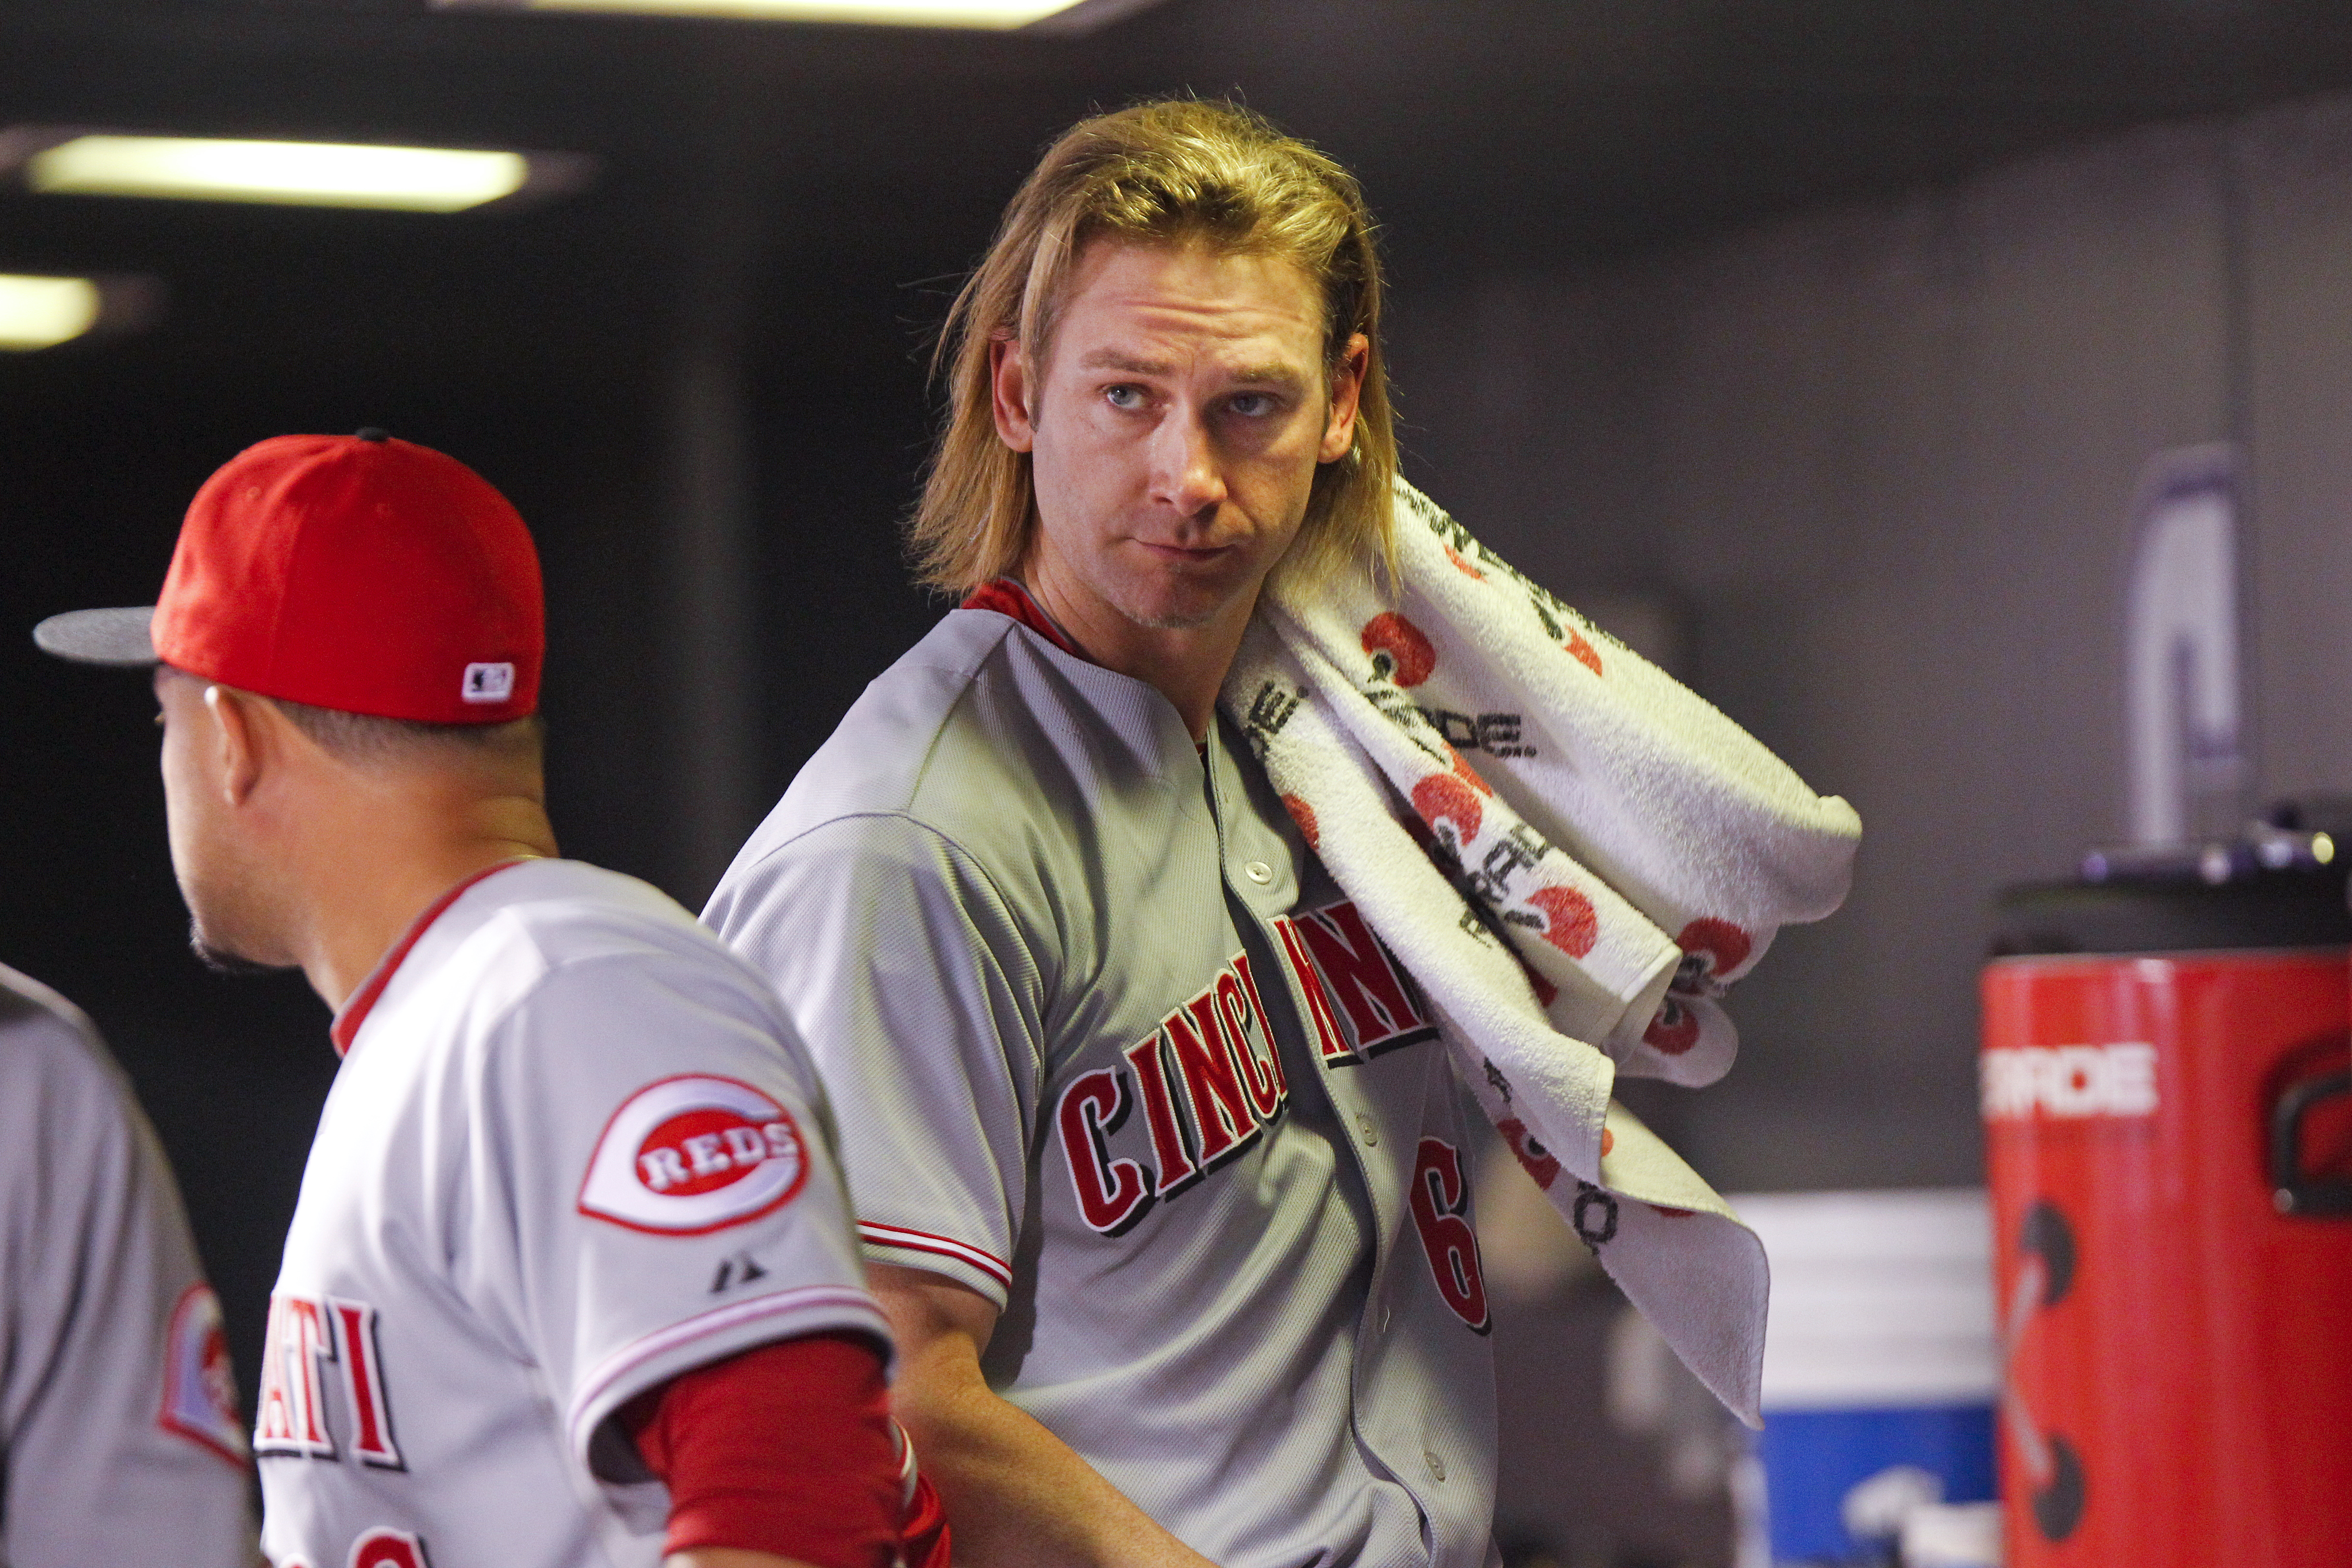 Bronson Arroyo kept right on playing, even after retiring from